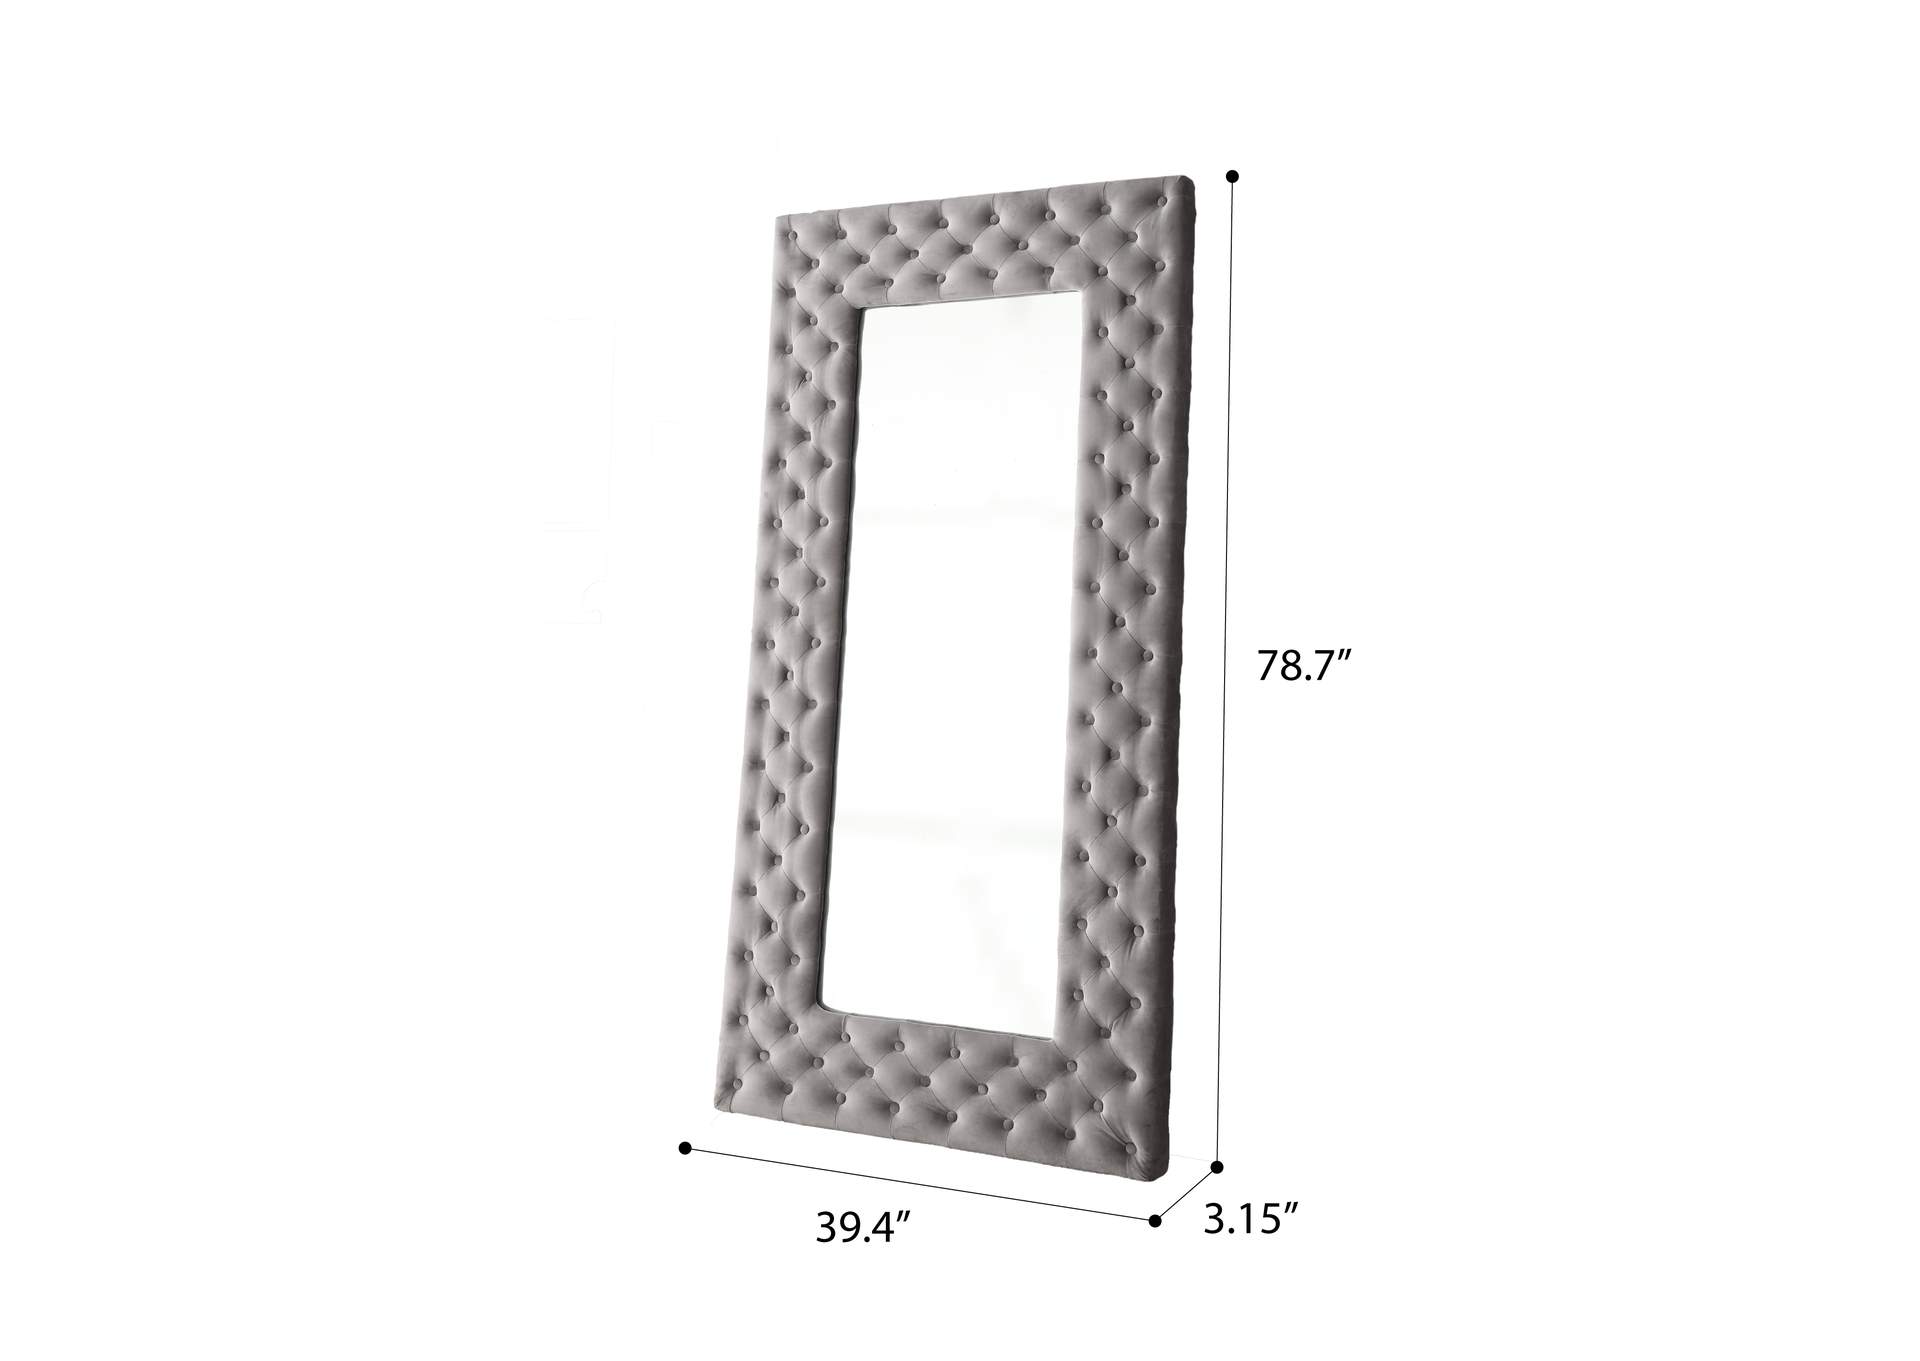 Lacey Upholstered Floor Mirror,Emerald Home Furnishings